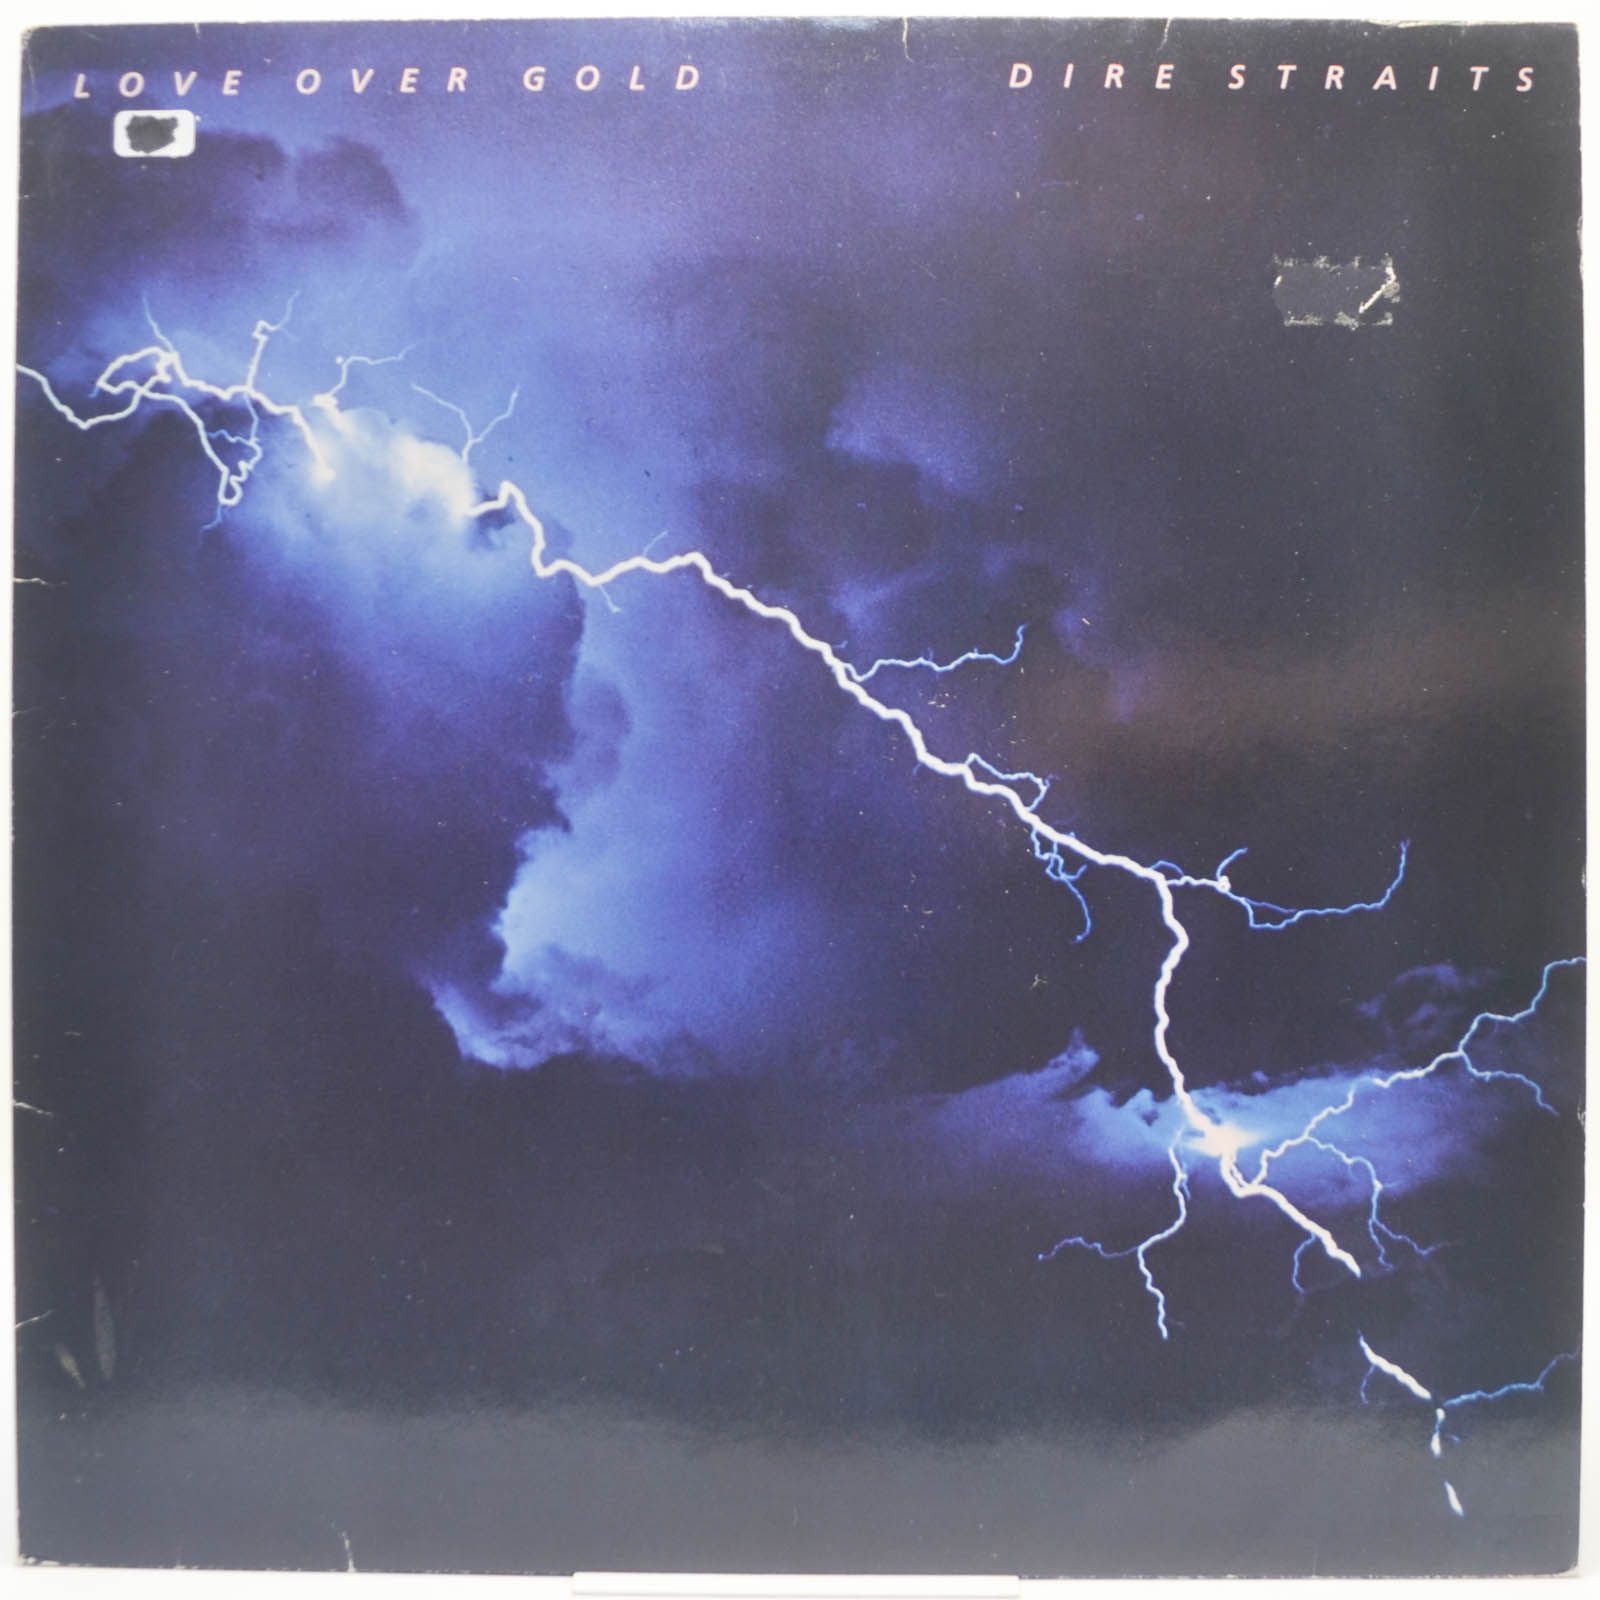 Dire Straits — Love Over Gold, 1982